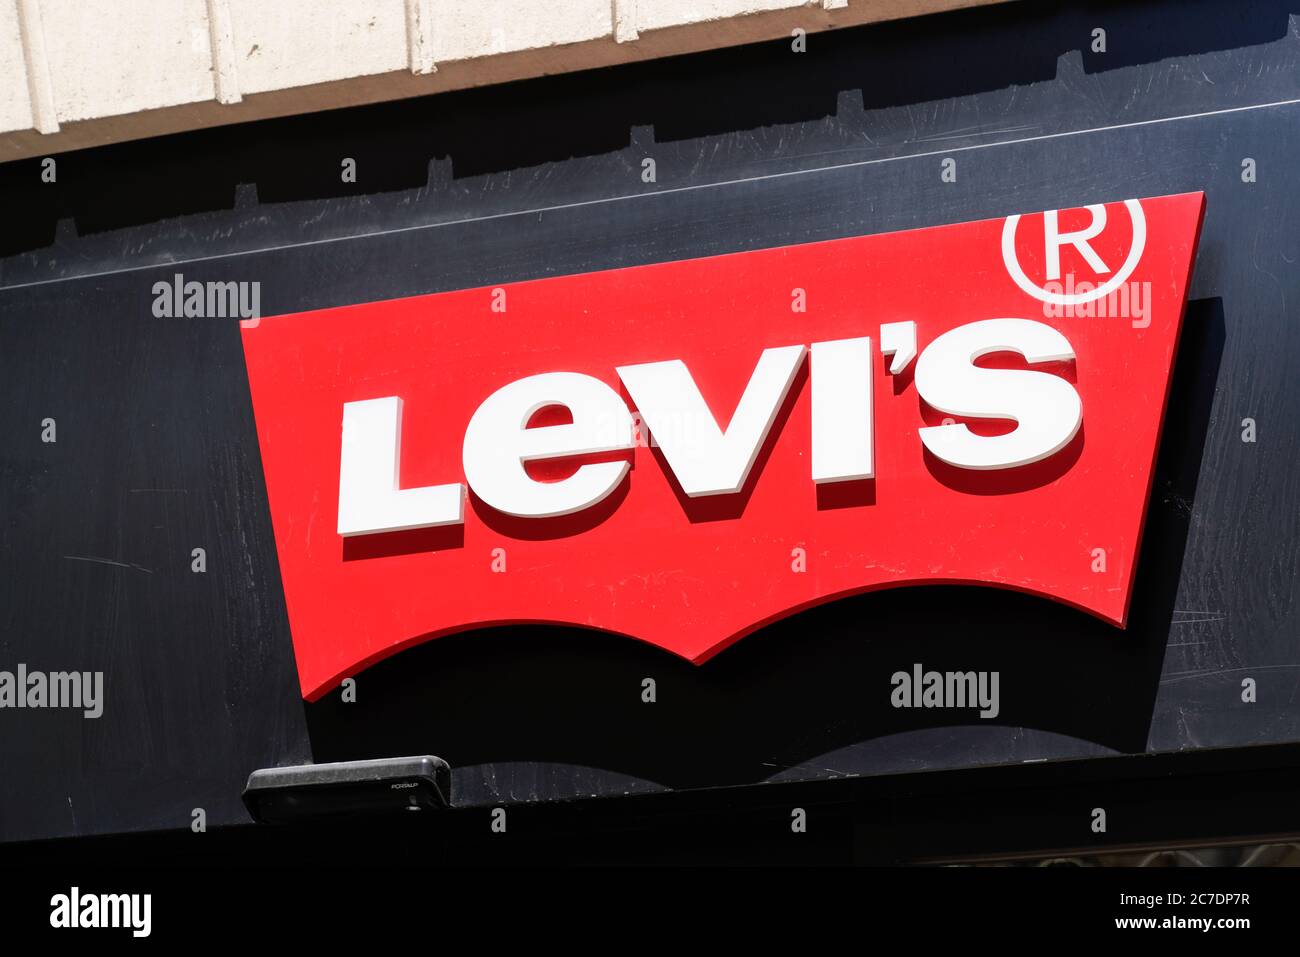 Bordeaux , Aquitaine / France - 07 07 2020 : Levi's logo red sign of Jeans levis  store of clothing fashion levi strauss retail shop Stock Photo - Alamy